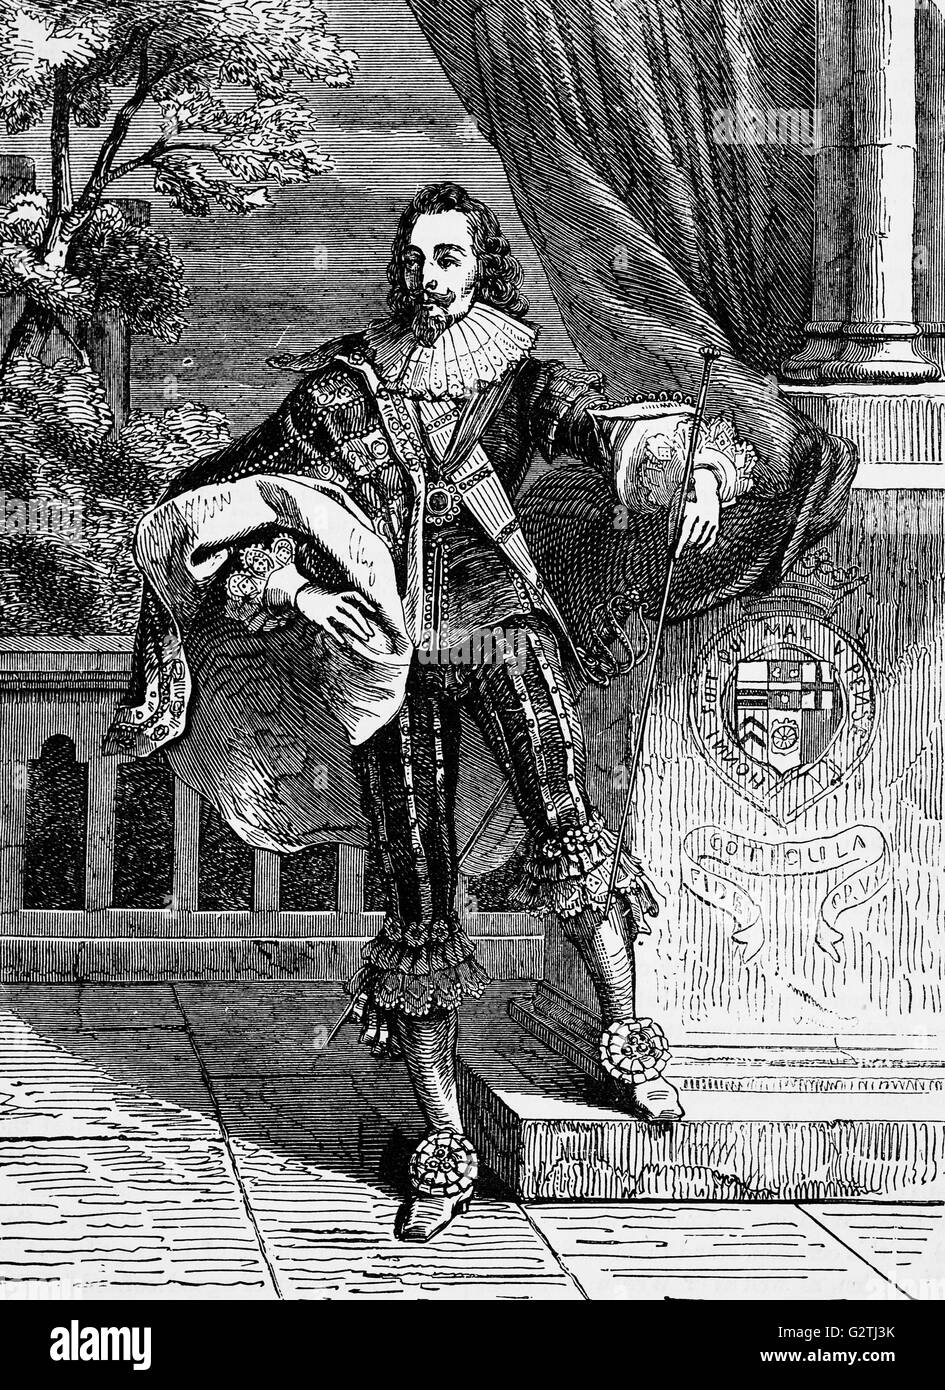 King Charles I, monarch of England, Scotland, and Ireland from 1625 until his execution in 1649. Stock Photo